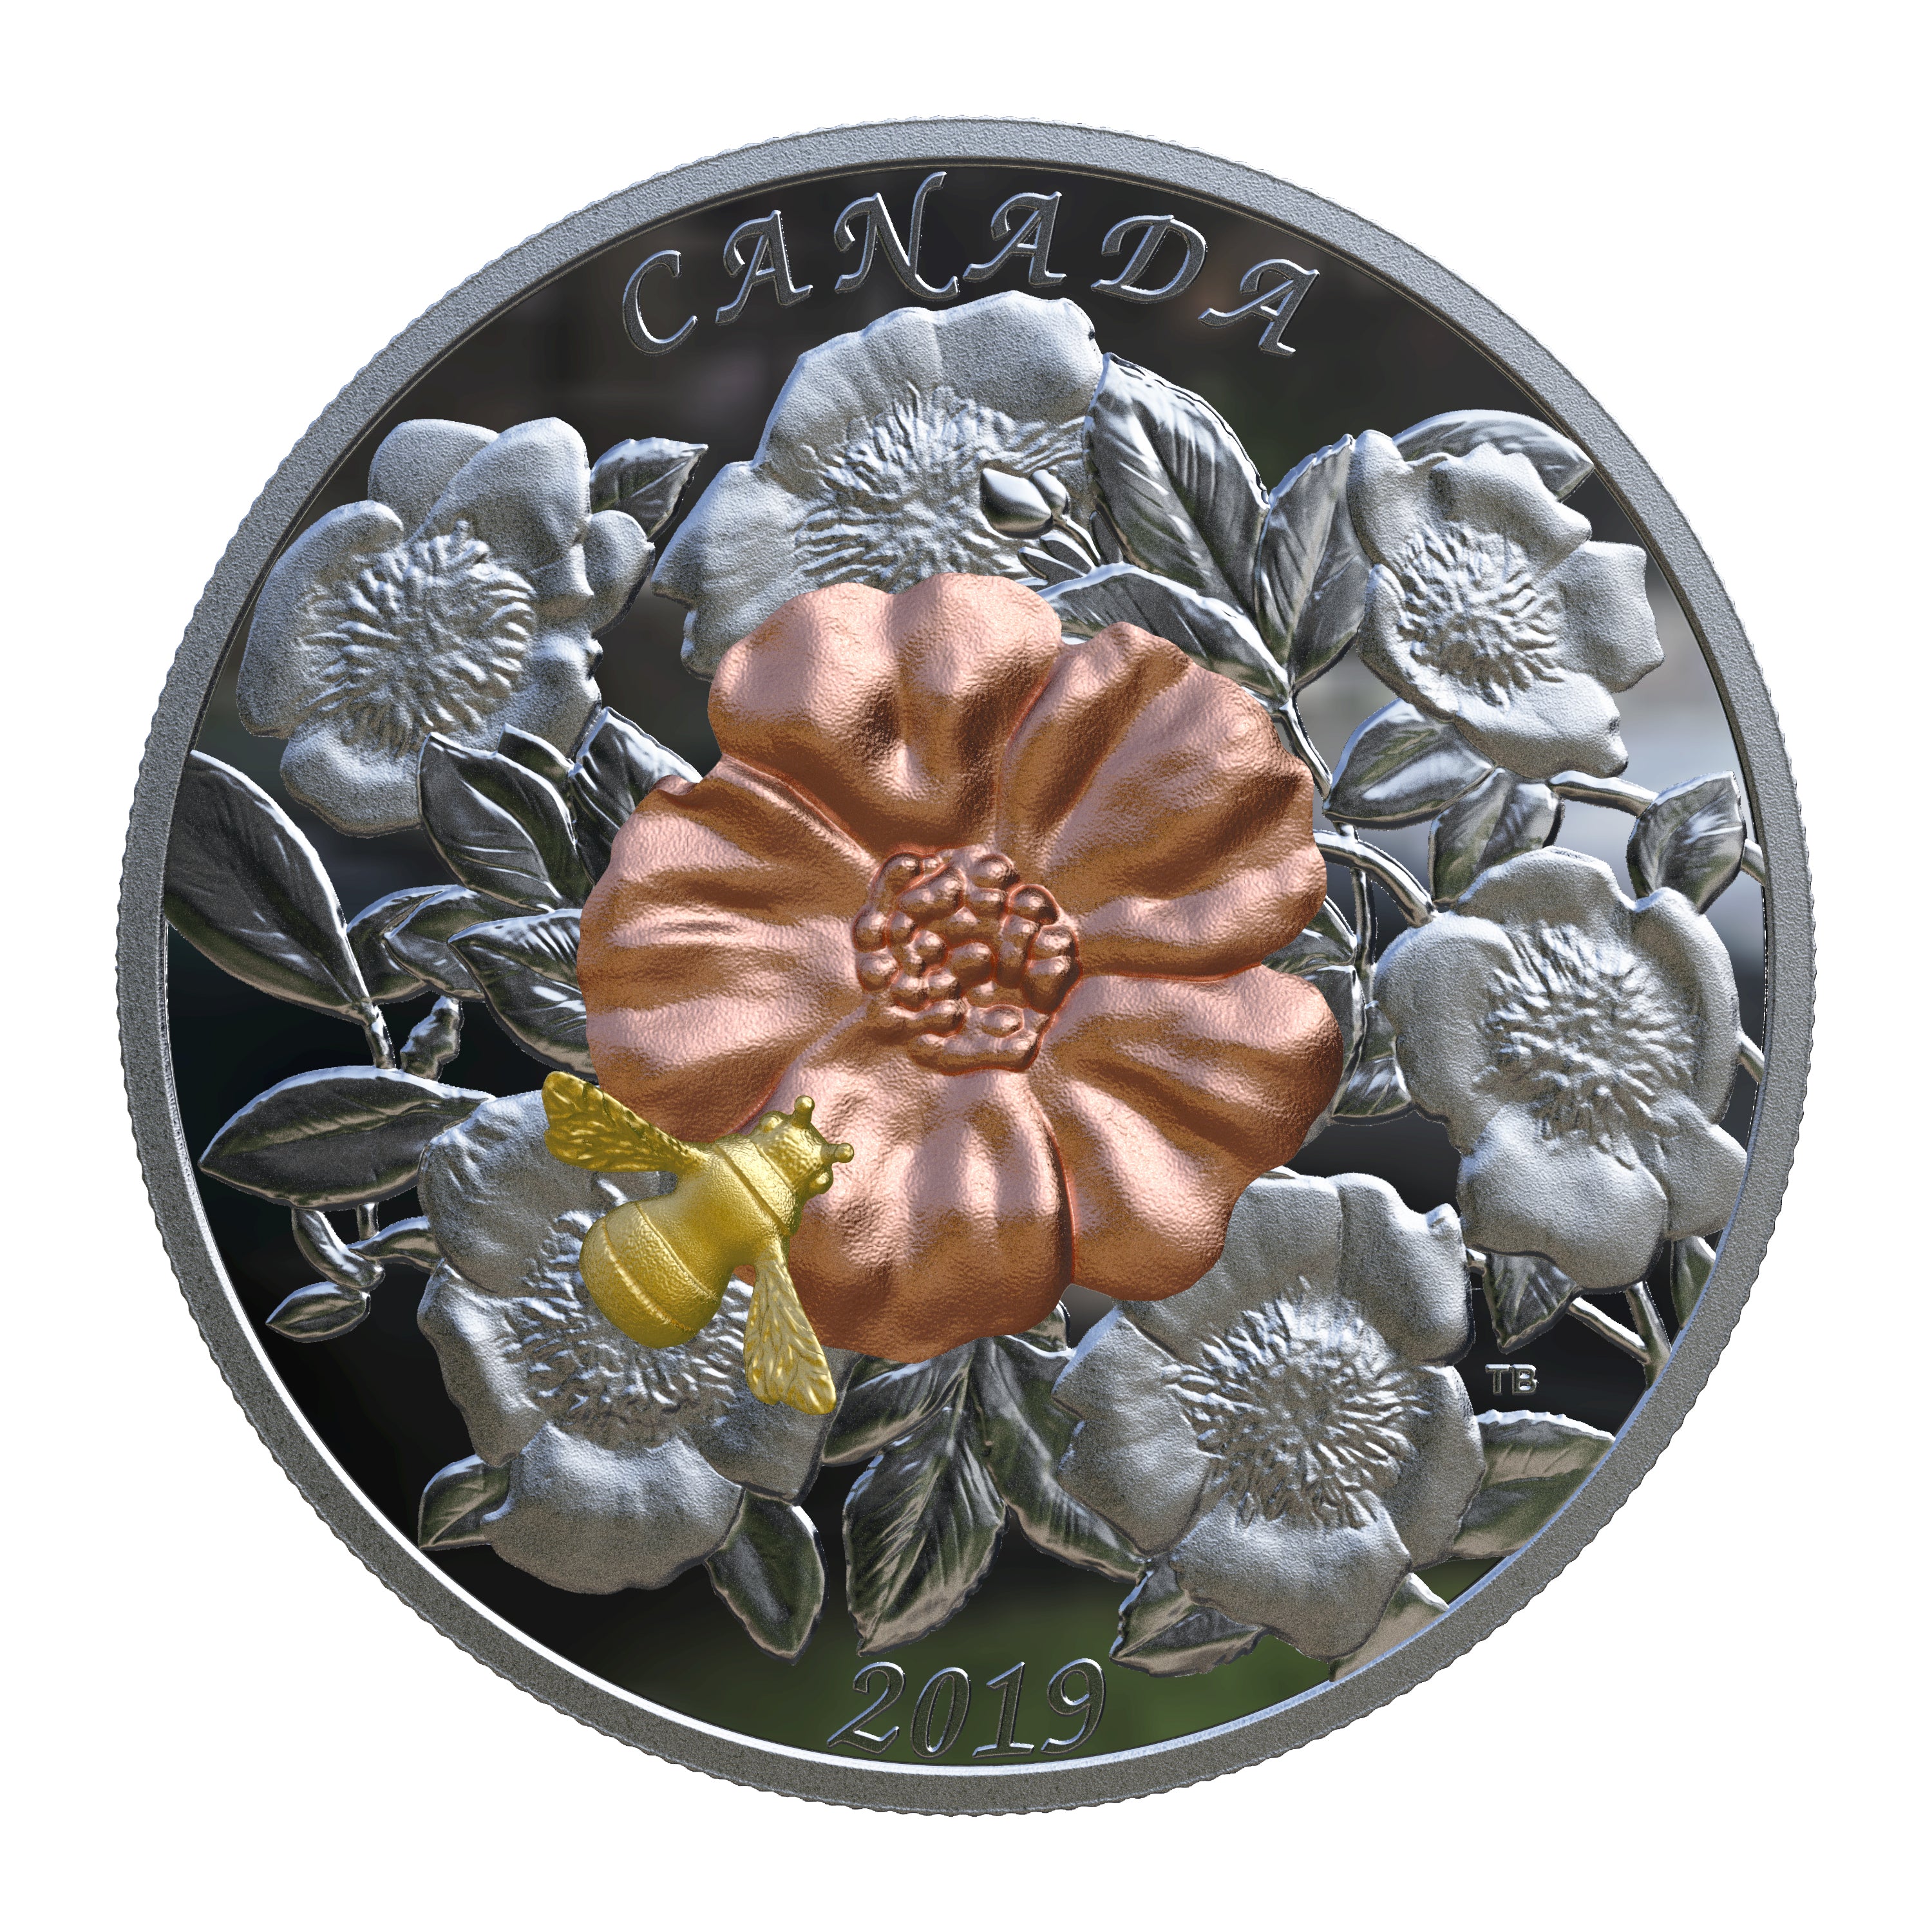 BUMBLE BEE AND BLOOM 5 Oz Silver Coin $50 Canada 2019